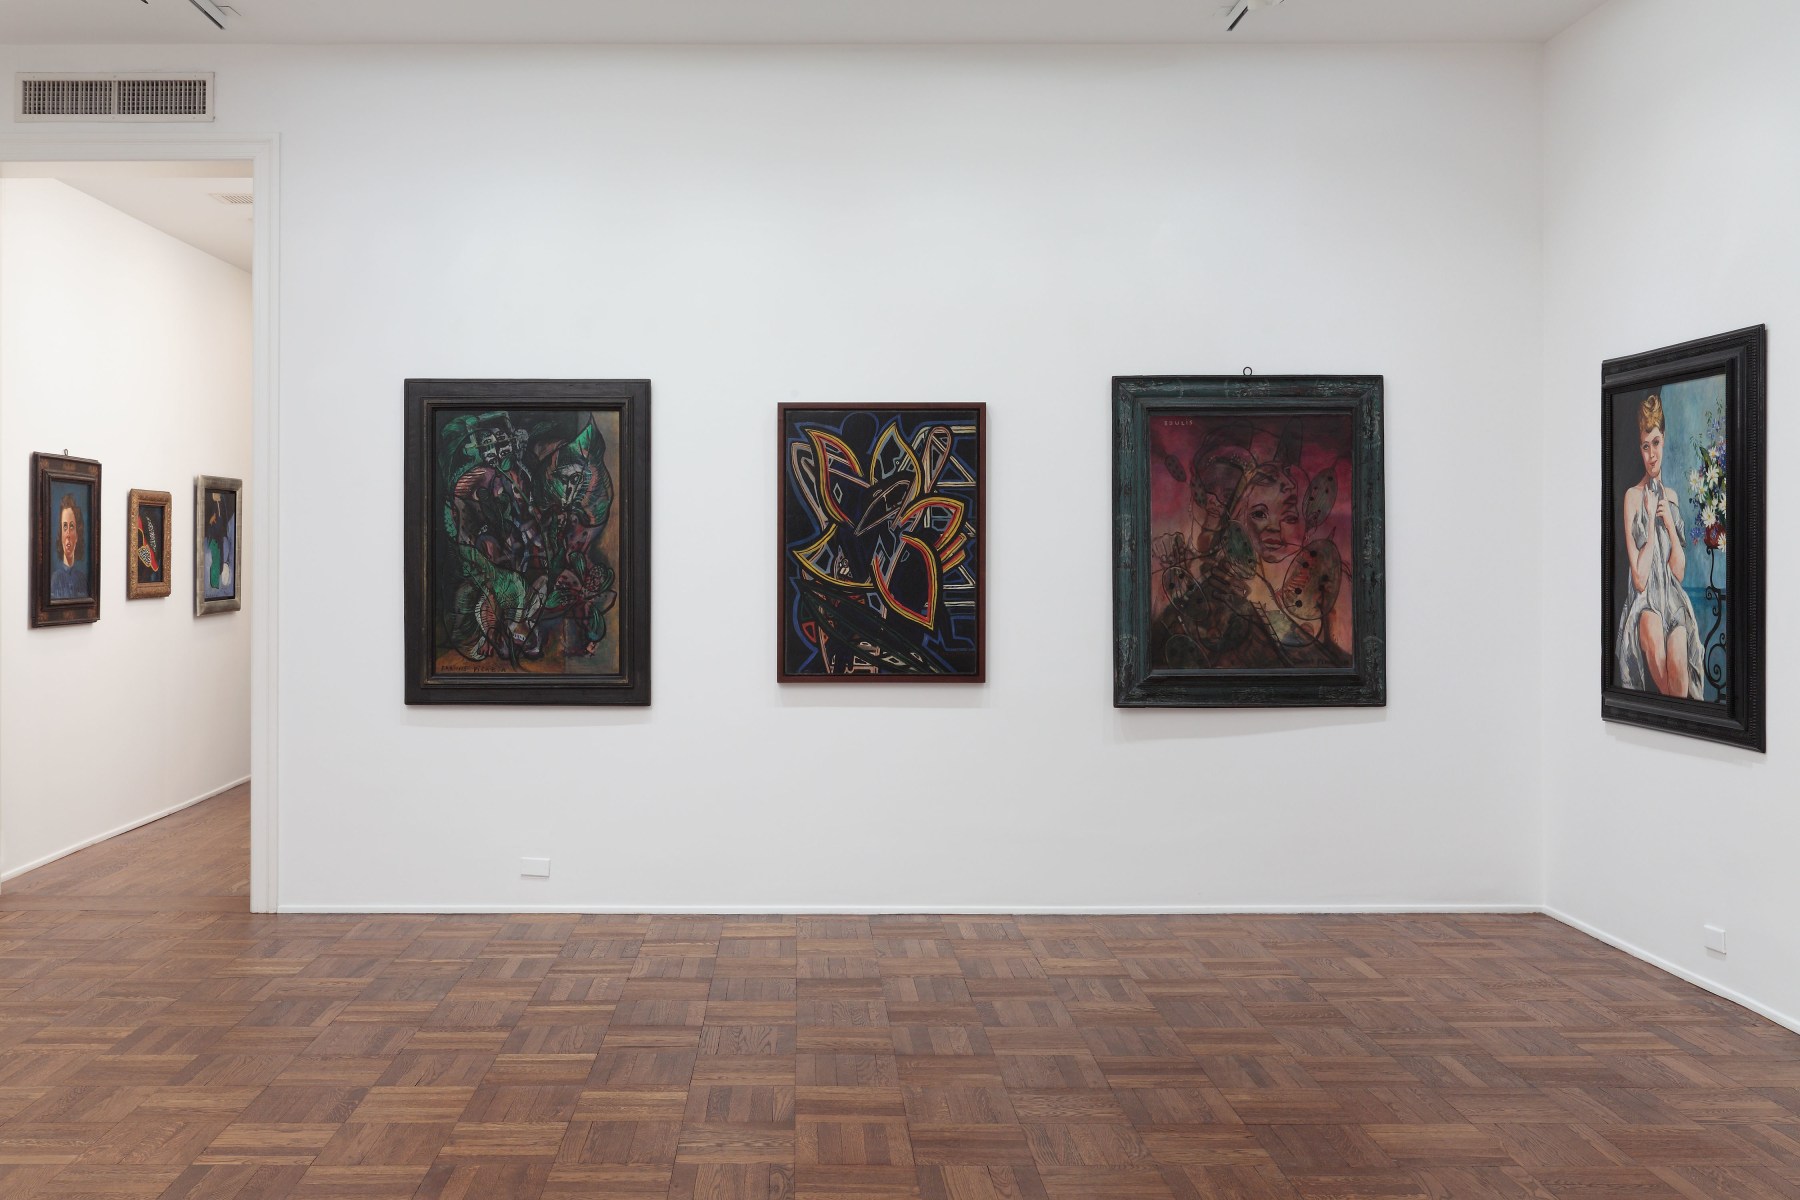 Francis Picabia, Late Paintings, New York, 2011-2012, Installation Image 2